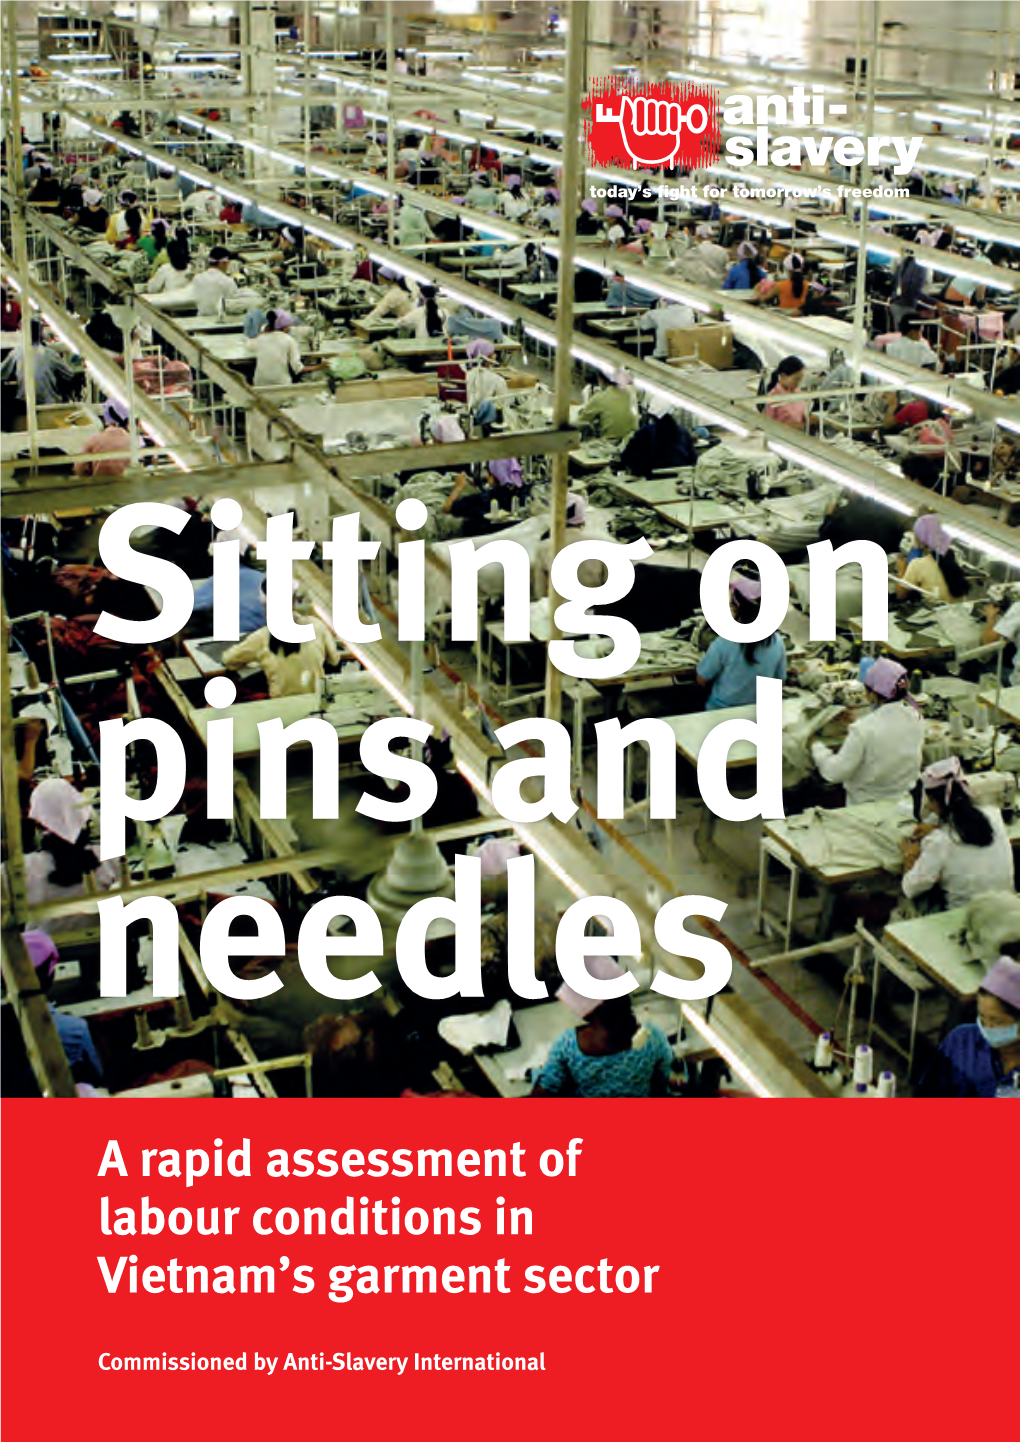 A Rapid Assessment of Labour Conditions in Vietnam's Garment